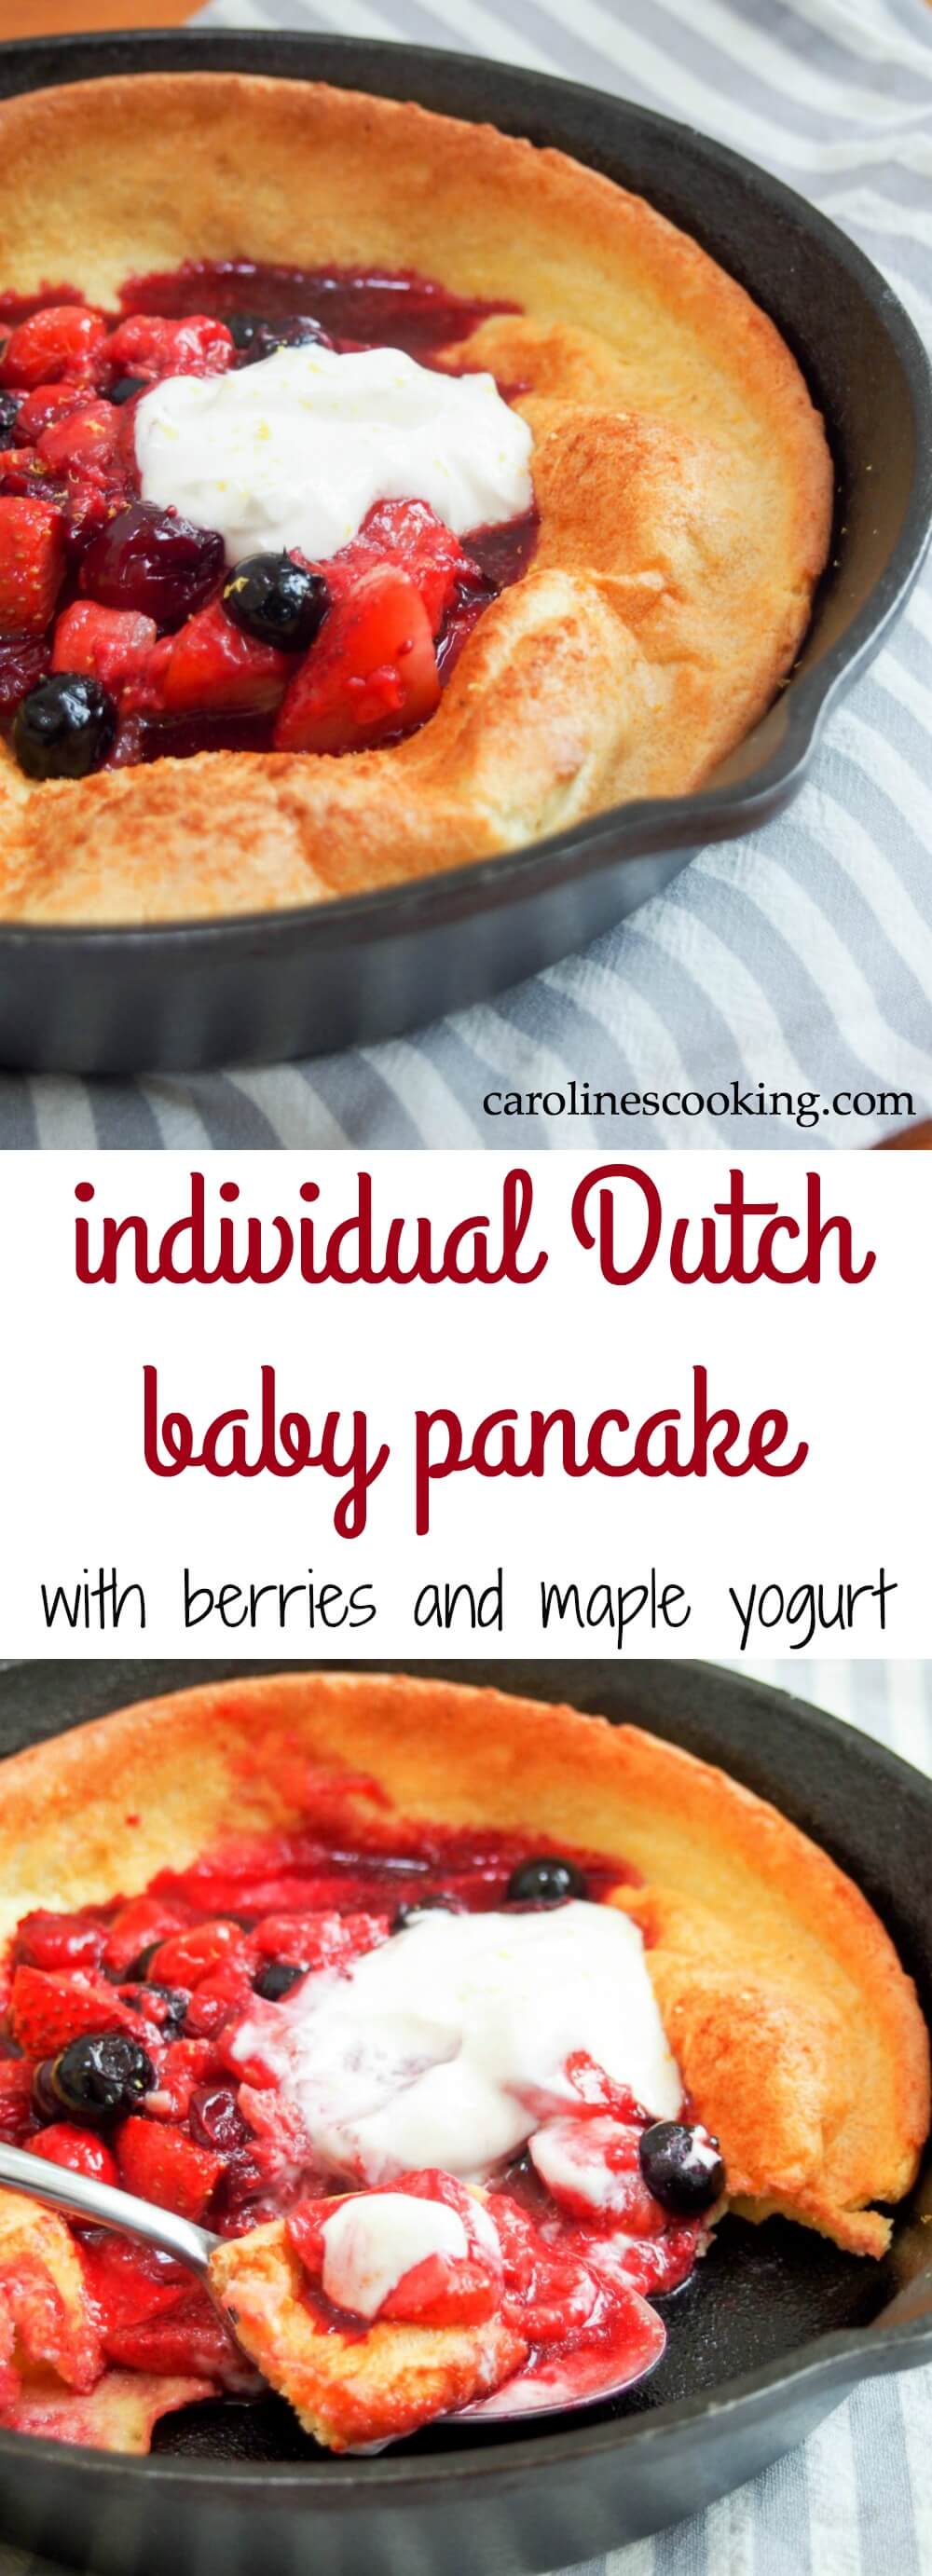 Healthy and quick enough for breakfast or brunch, sweet enough for dessert, this individual Dutch baby pancake with berries & maple yogurt is easy & delicious.  No refined sugar too.